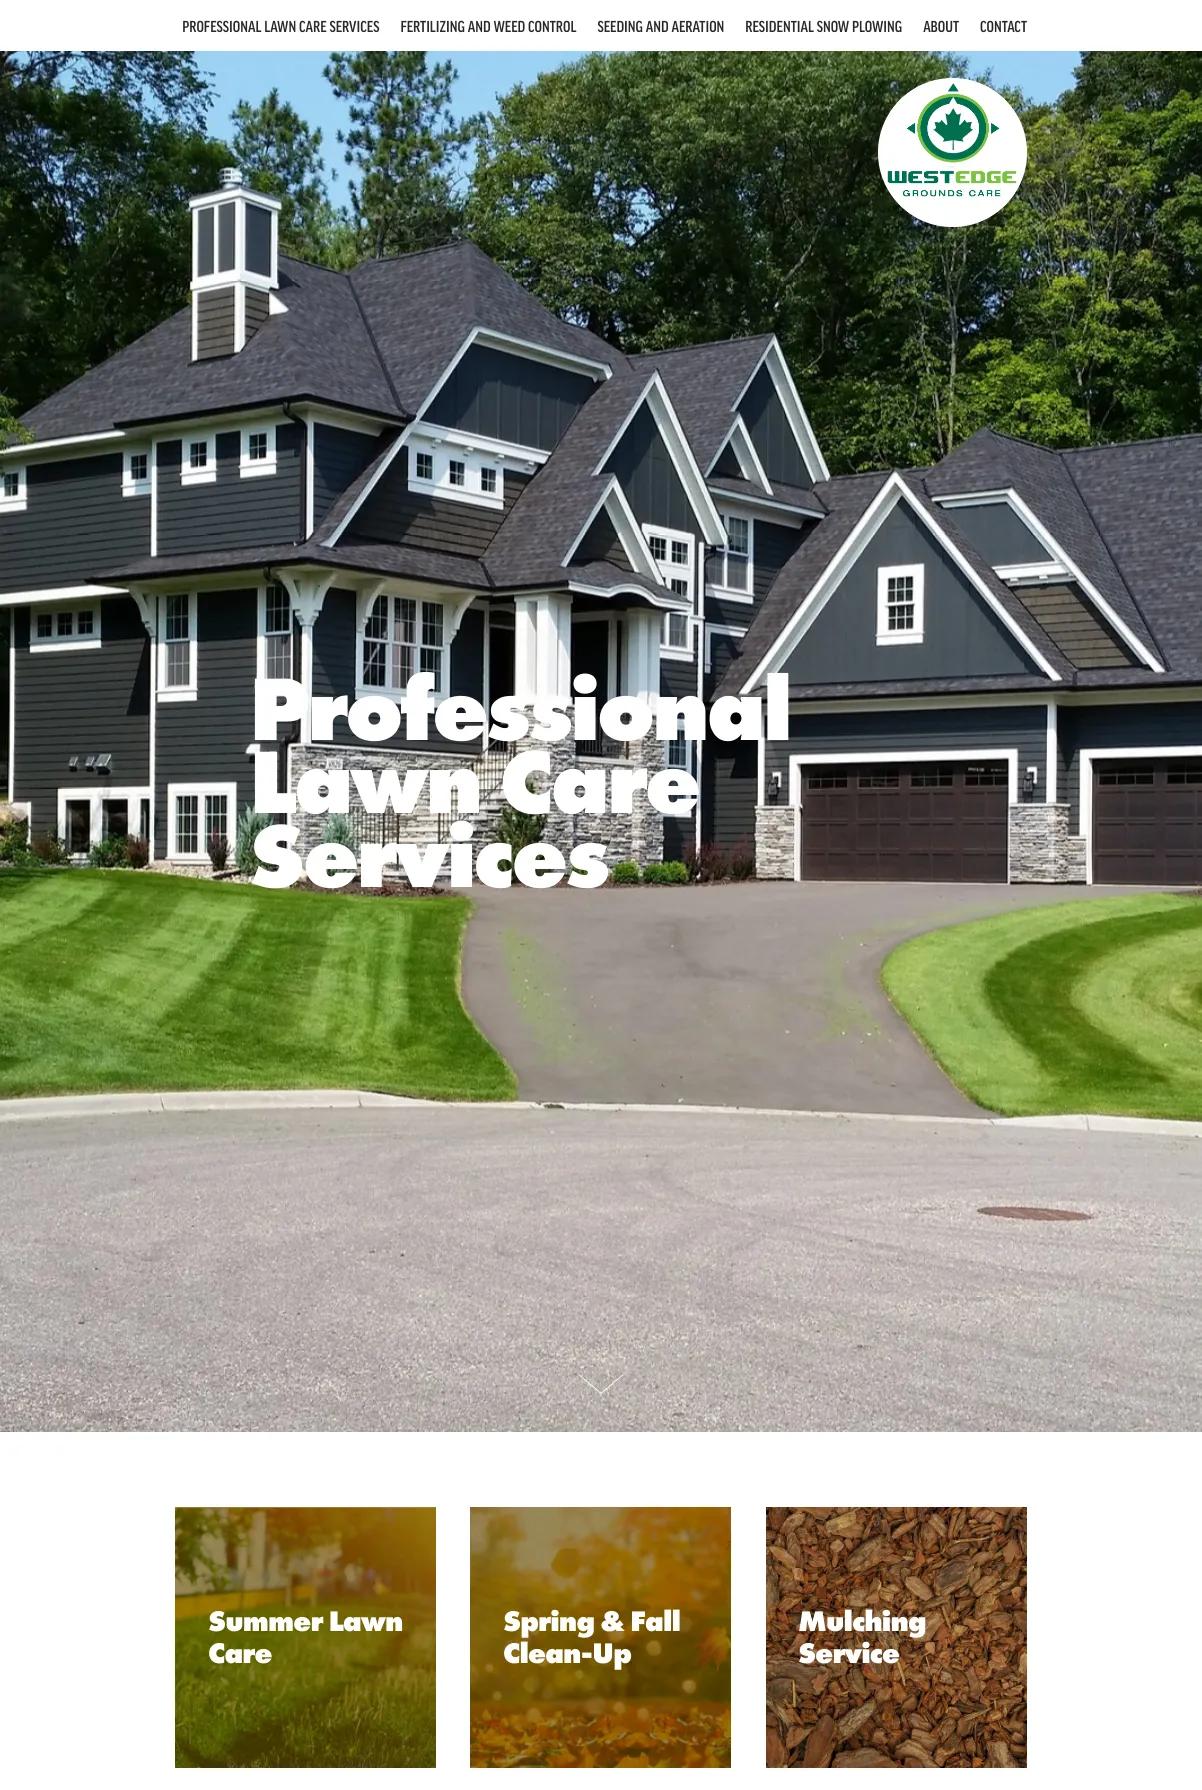 Screenshot 2 of Westedge Grounds Care (Example Squarespace Lawn Care Website)